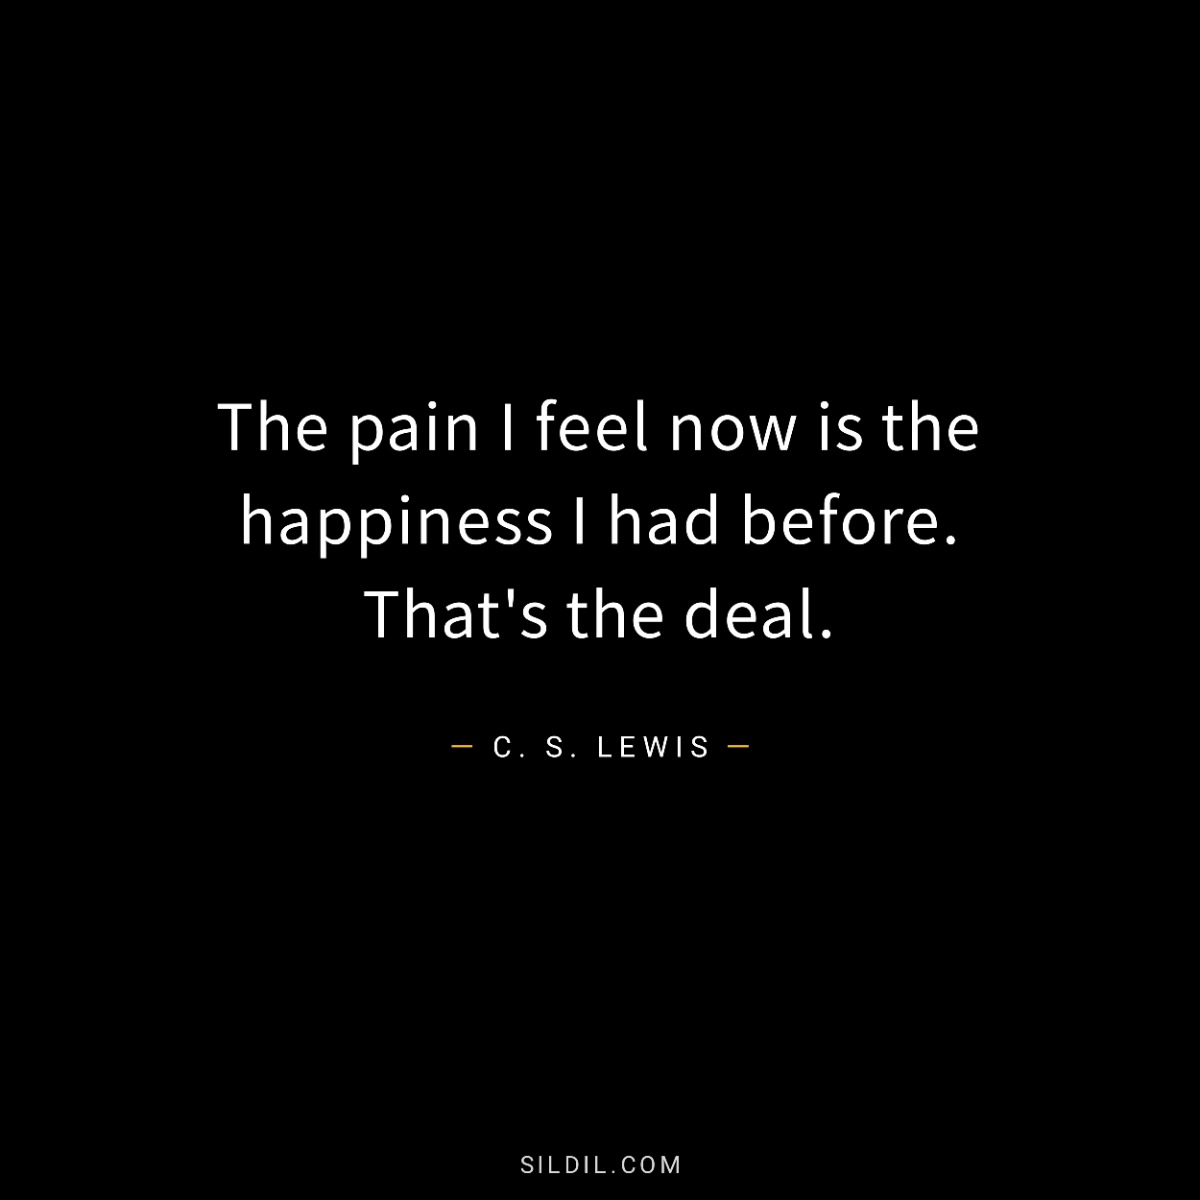 The pain I feel now is the happiness I had before. That's the deal.